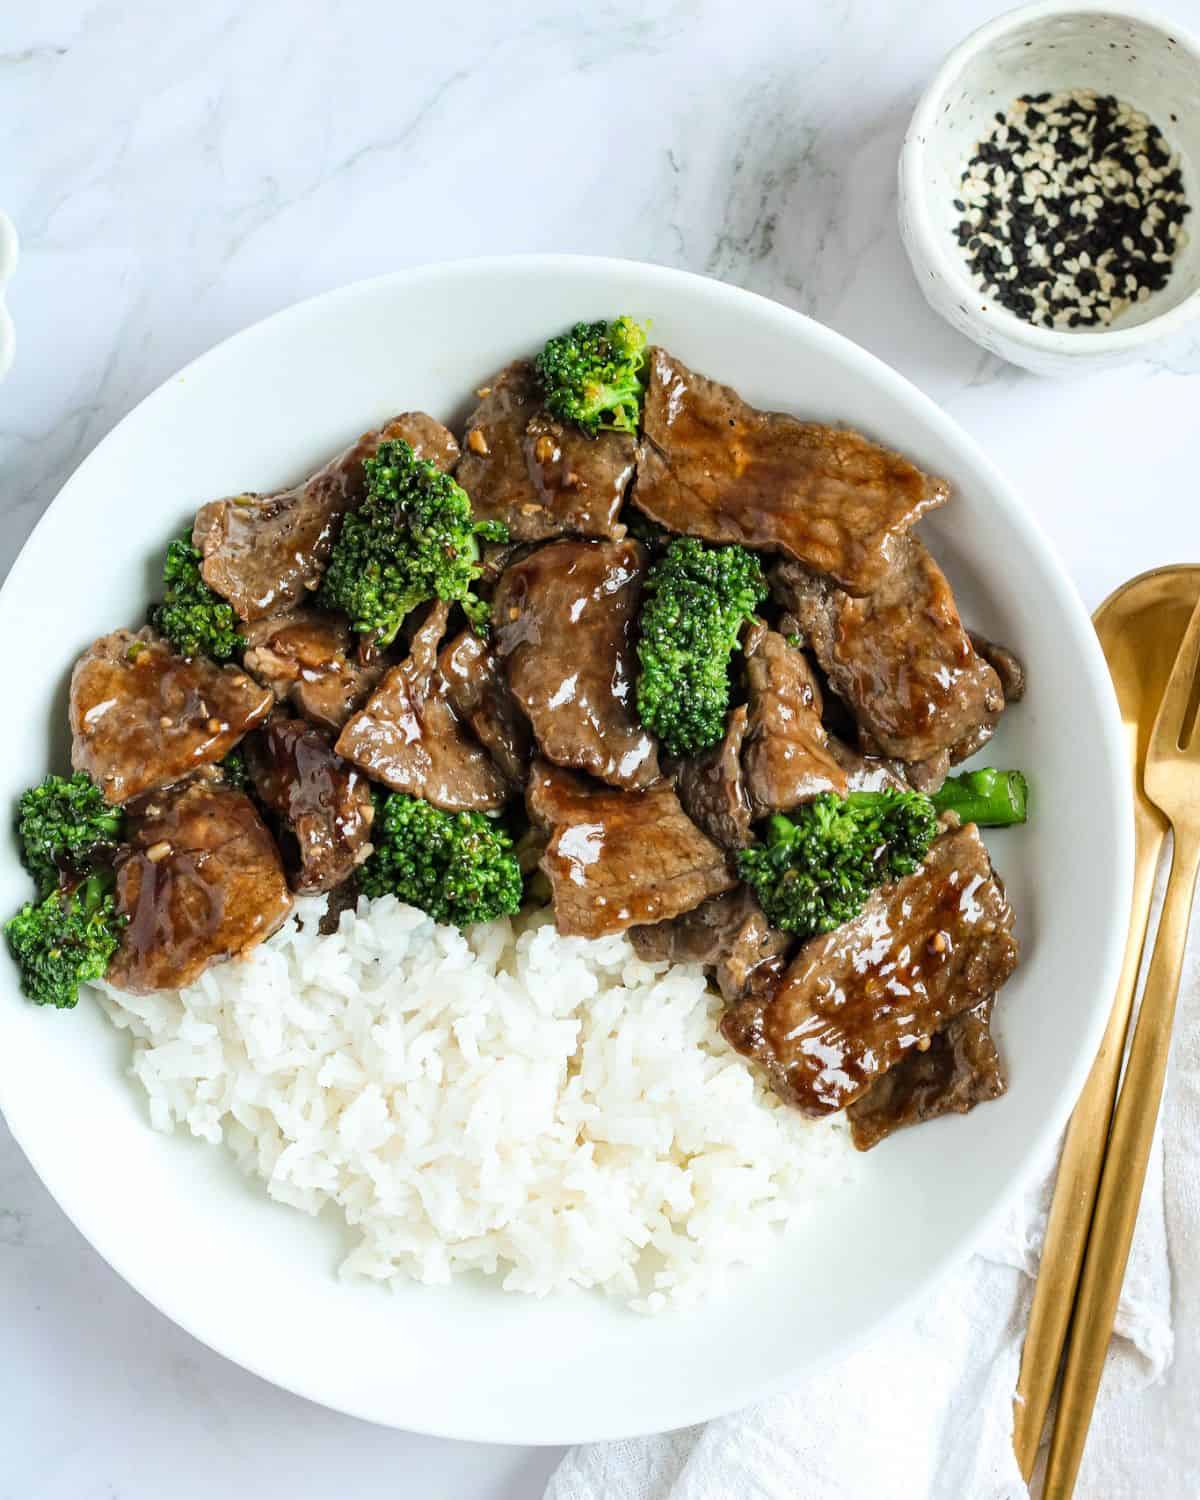 A bowl with beef and broccoli dish with rice.